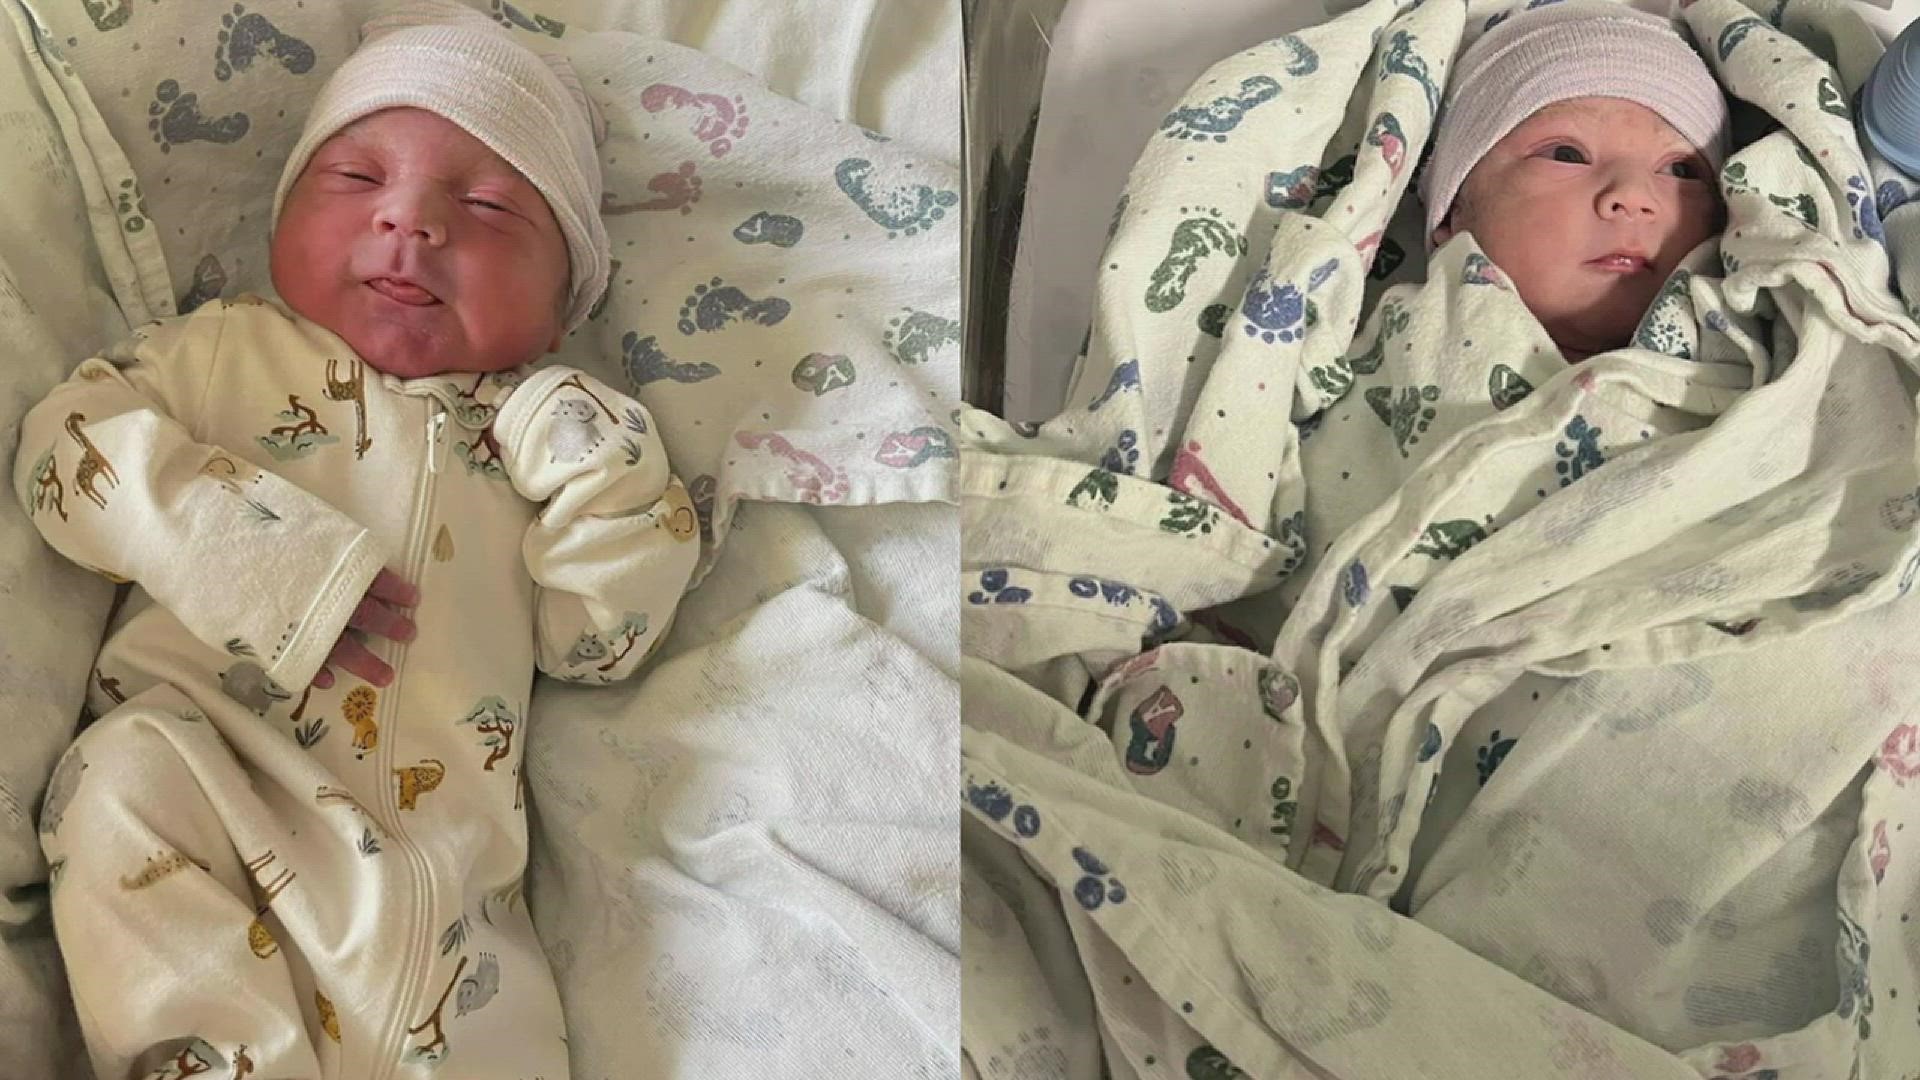 The identical twin boys were born nearly four and a half hours apart, but both managed to make it out during the palindrome date.